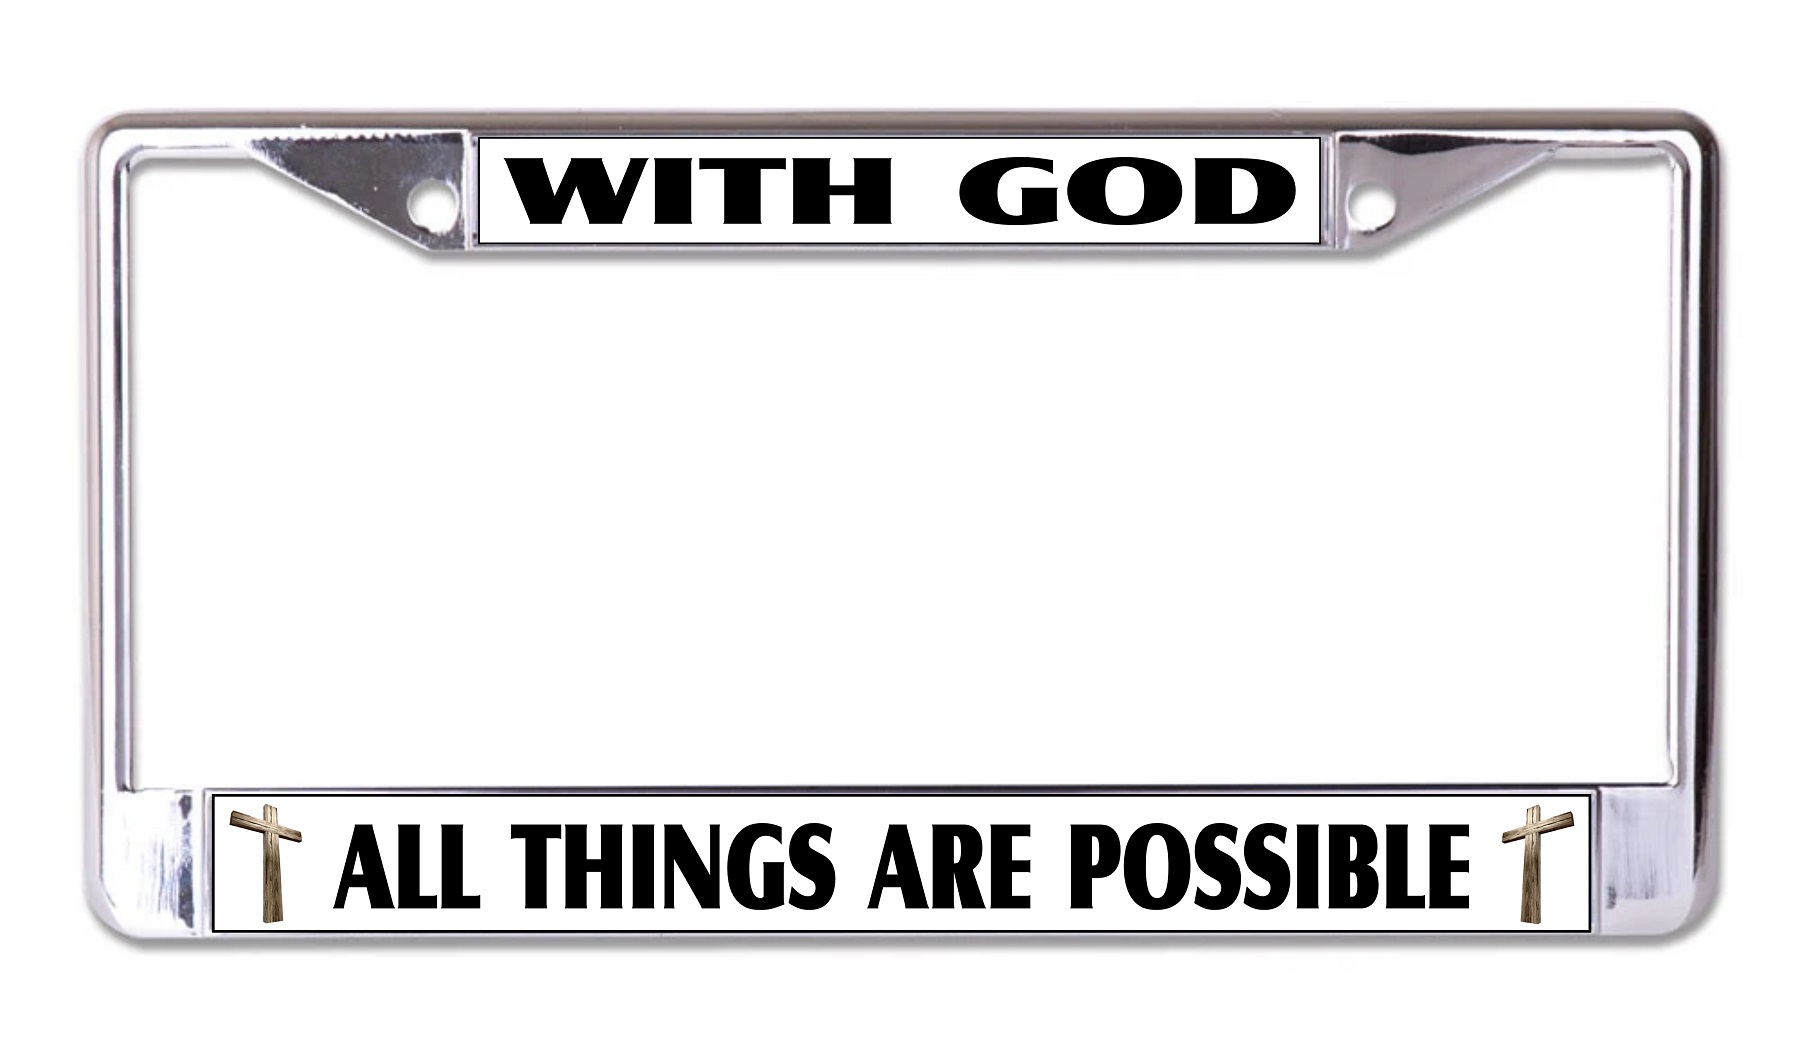 With God All Things Are Possible on White Chrome License Plate FRAME